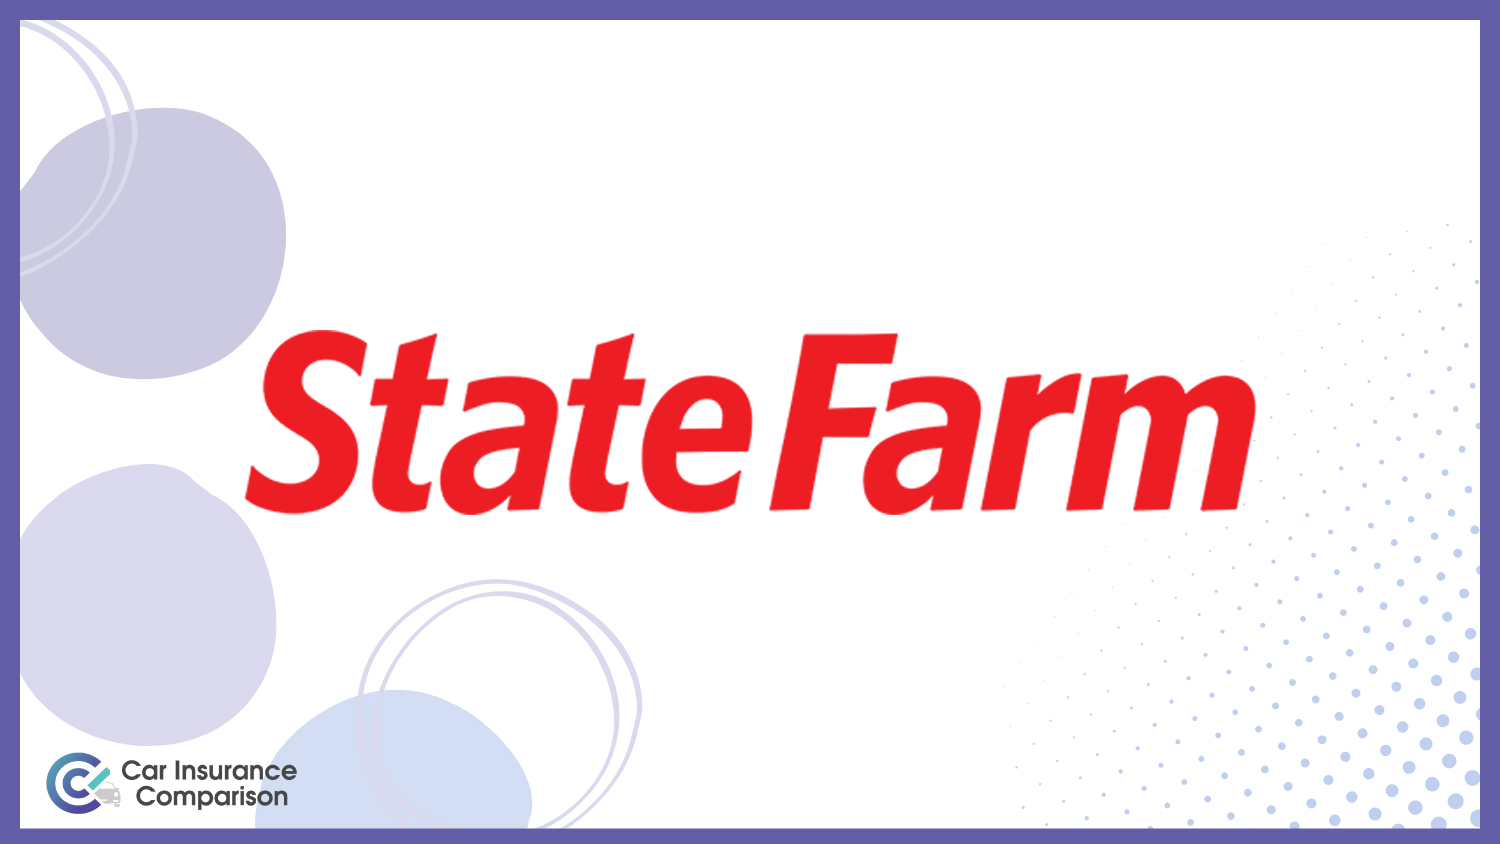 State farm: Best Car Insurance Companies That Only Look Back 3 Years